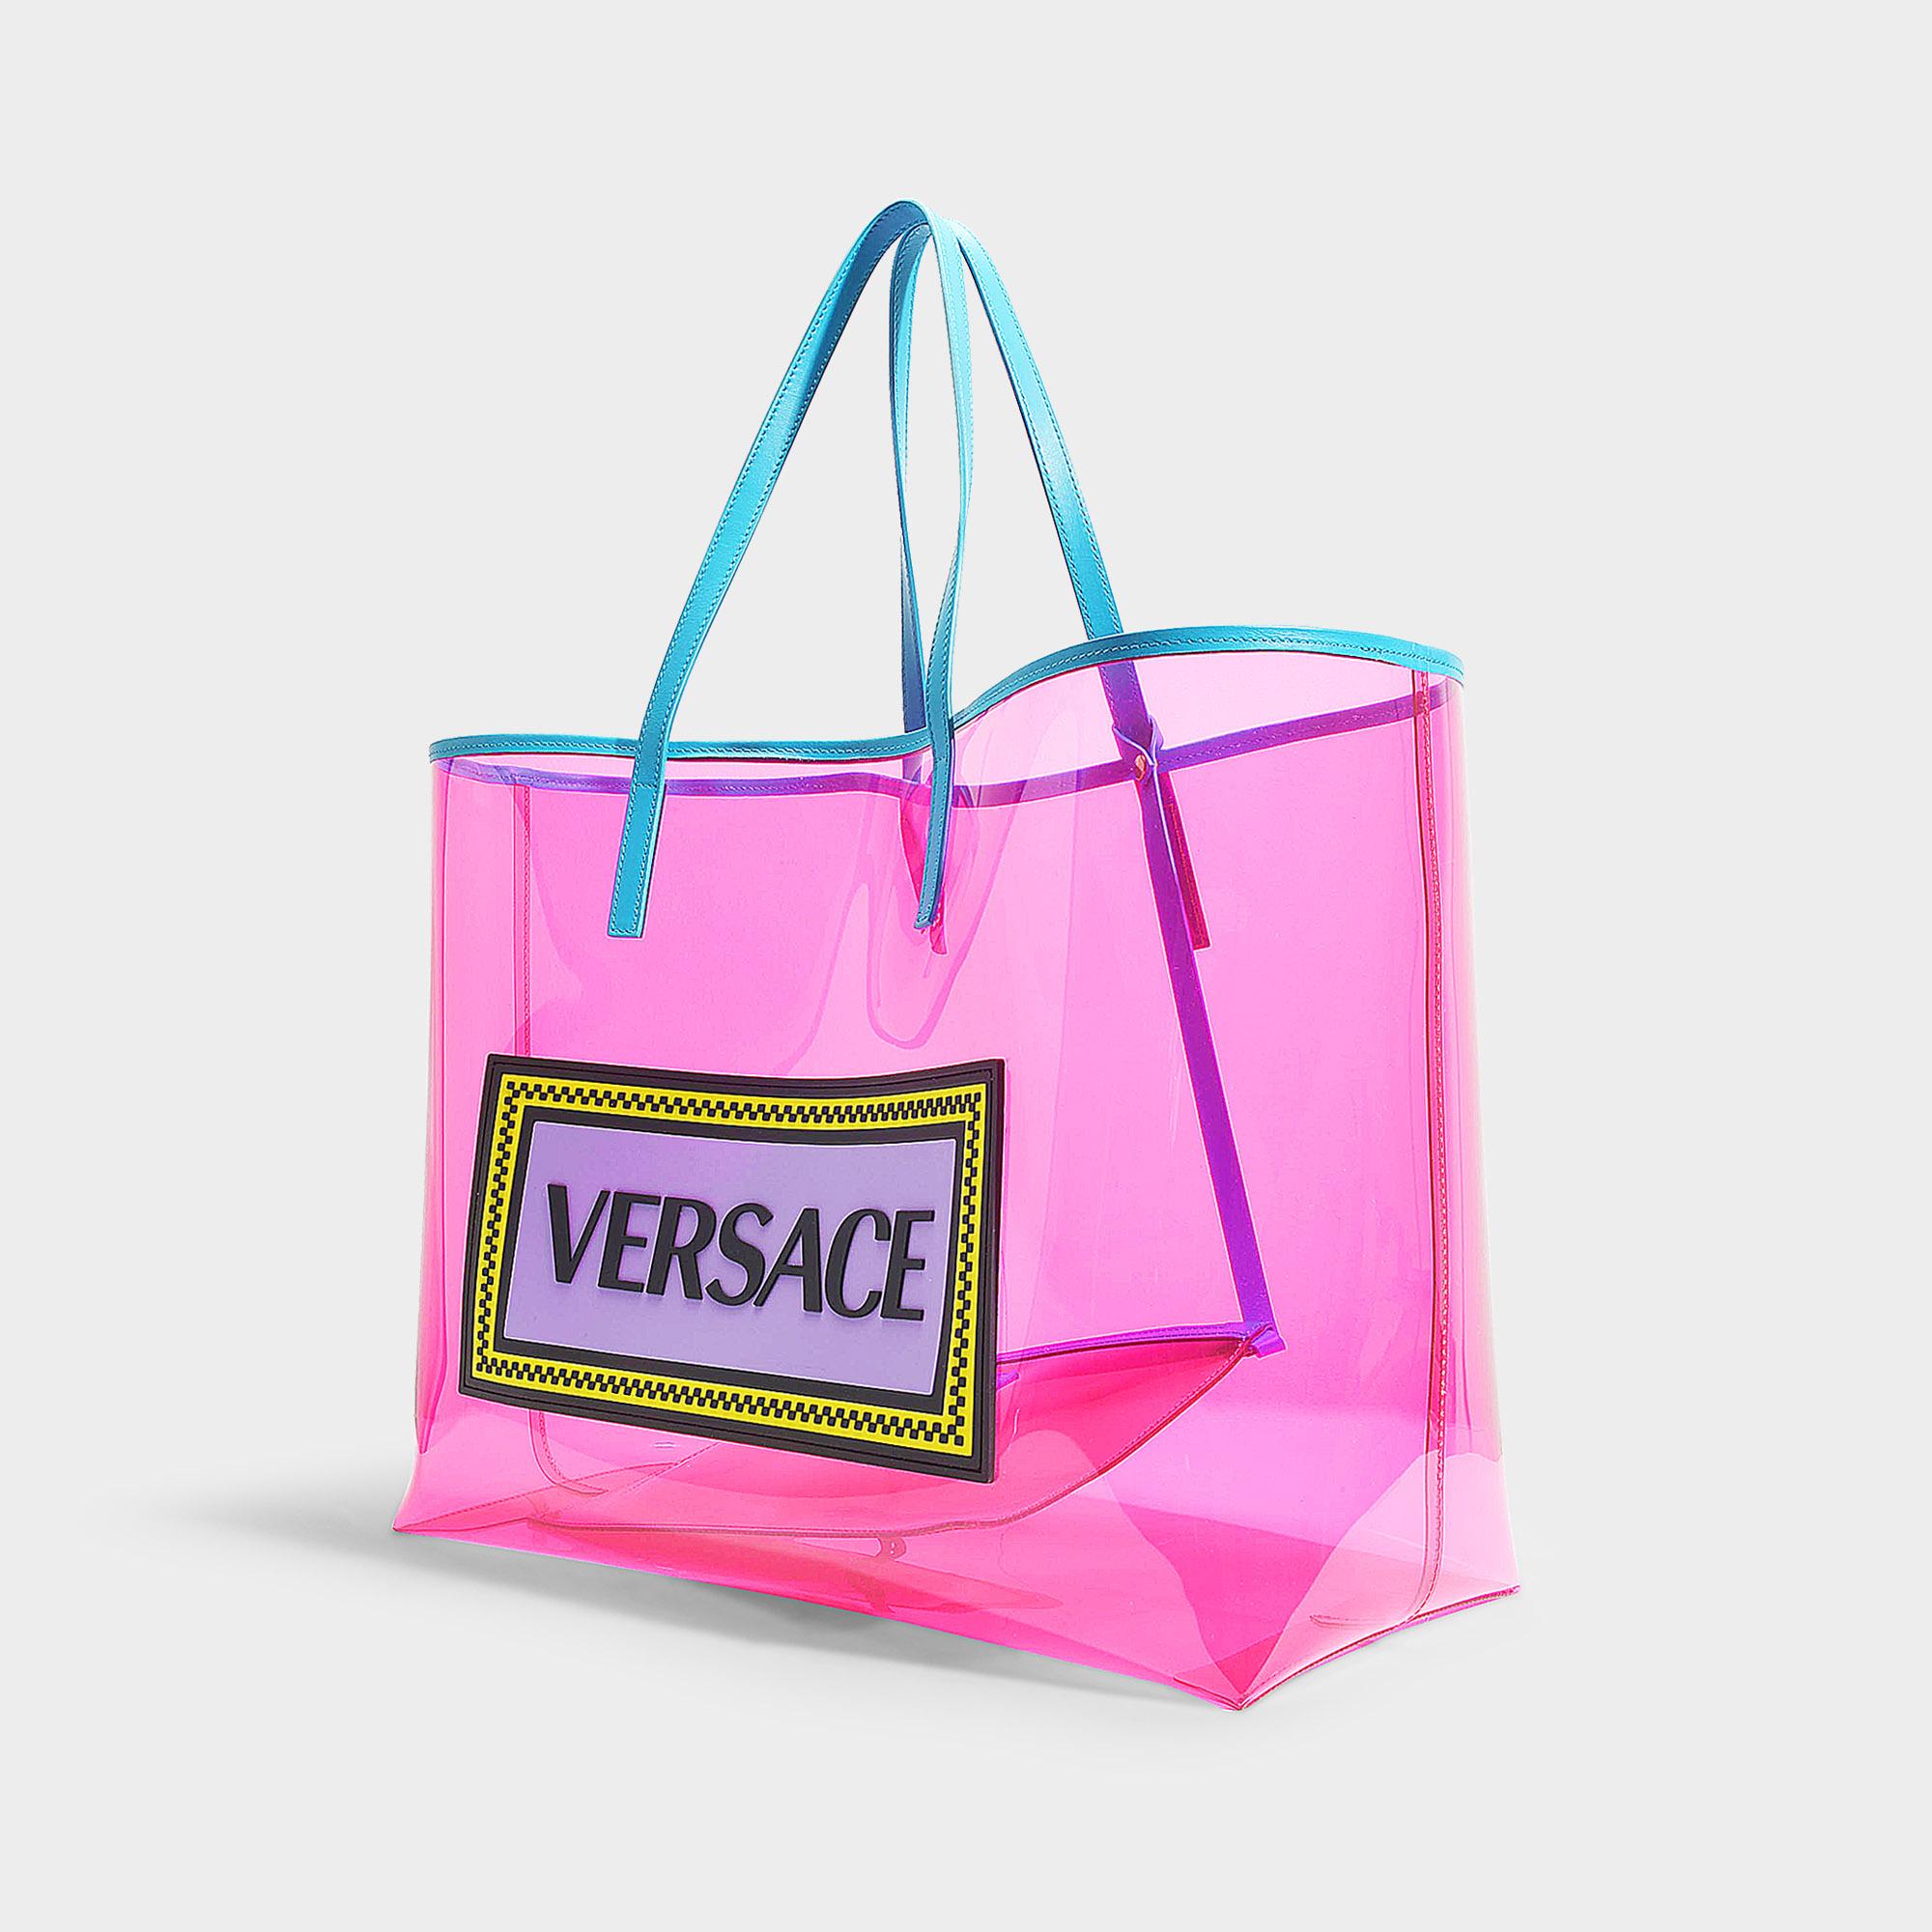 versace clear tote,www.autoconnective.in